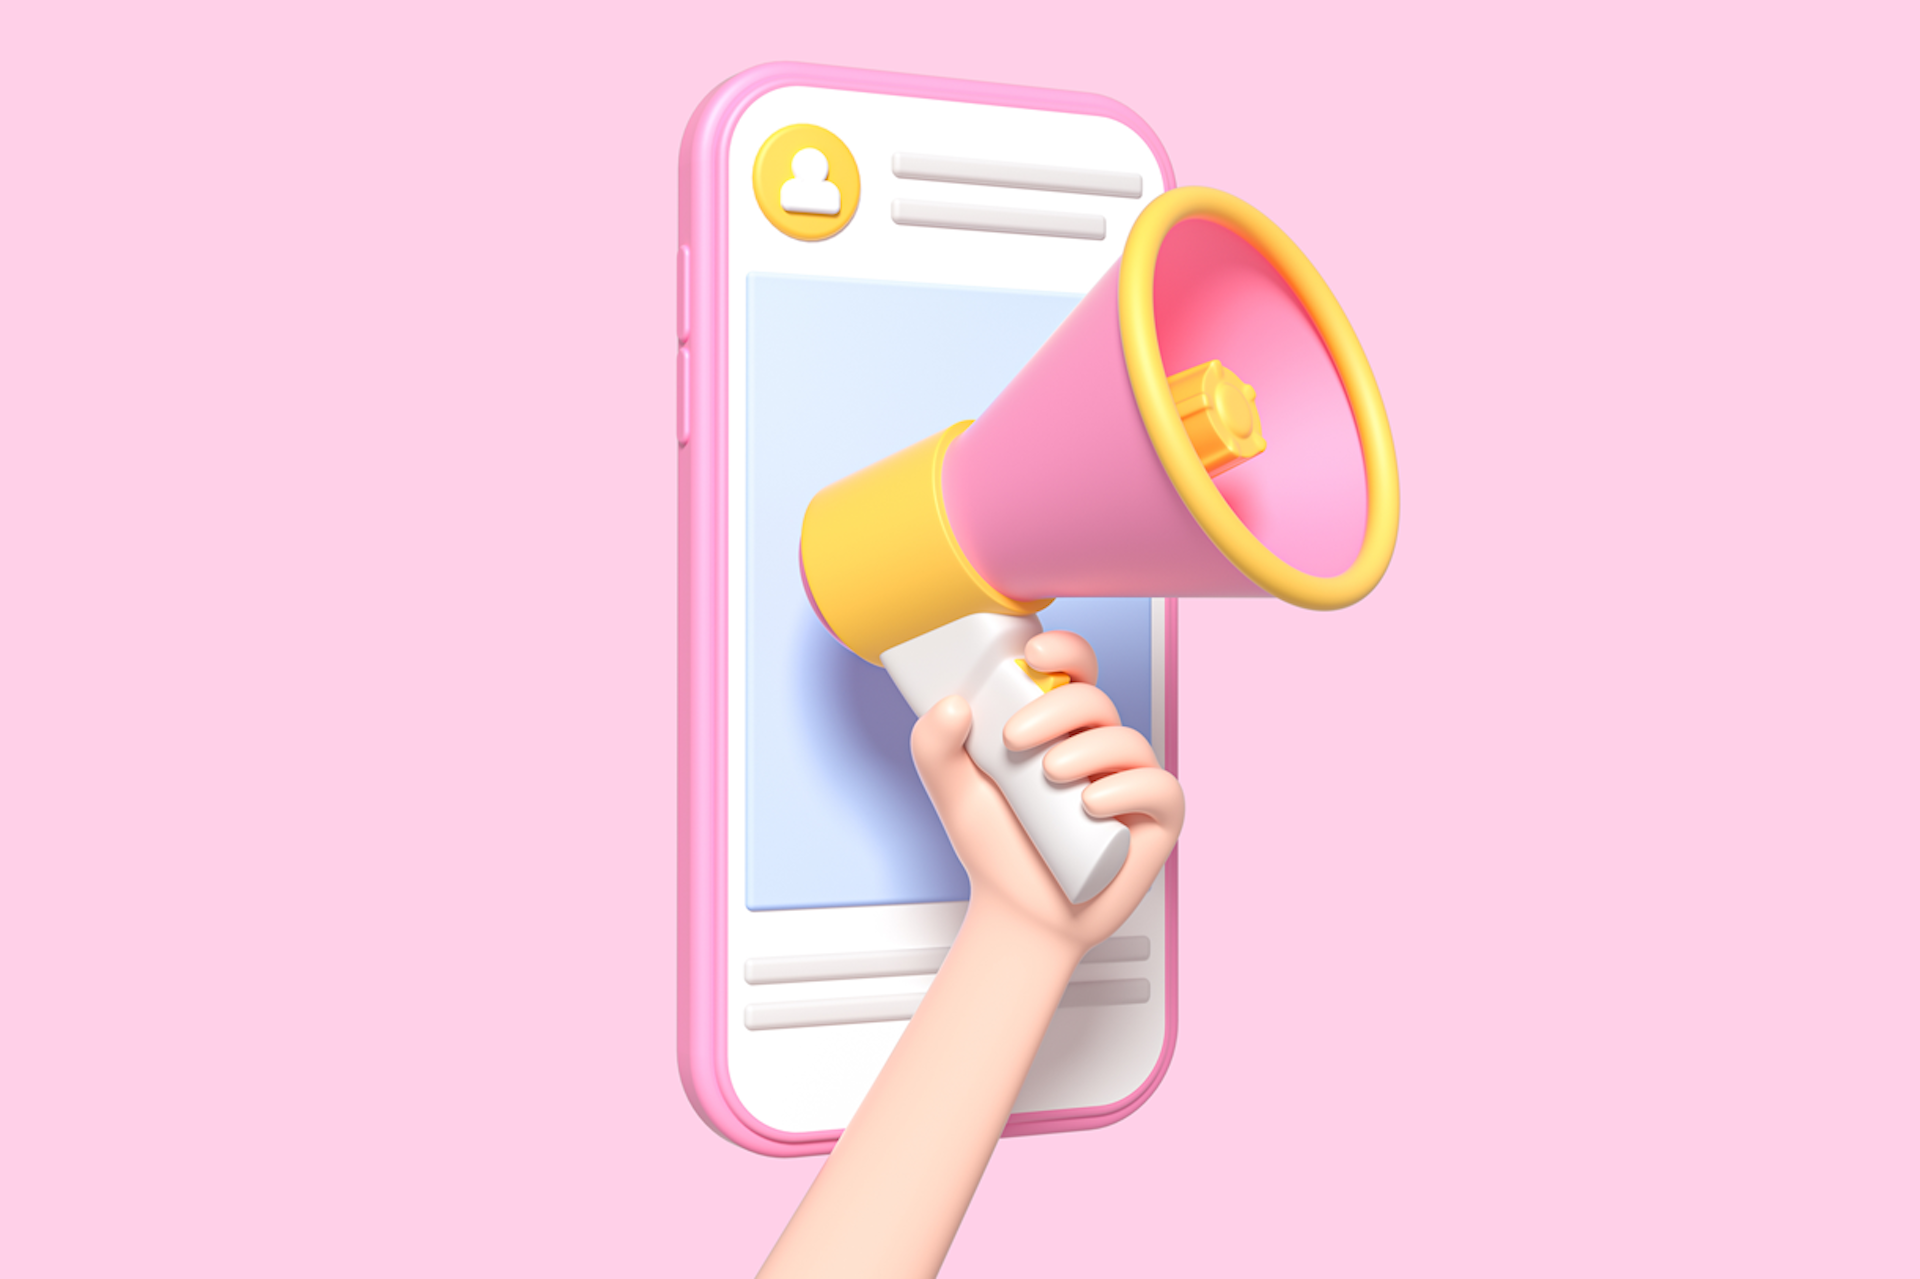 Illustration of a person holding a pink megaphone in front of a phone. Micro-influencers help you amplify your message in cost-effective ways. Working with micro-influencers blog post.